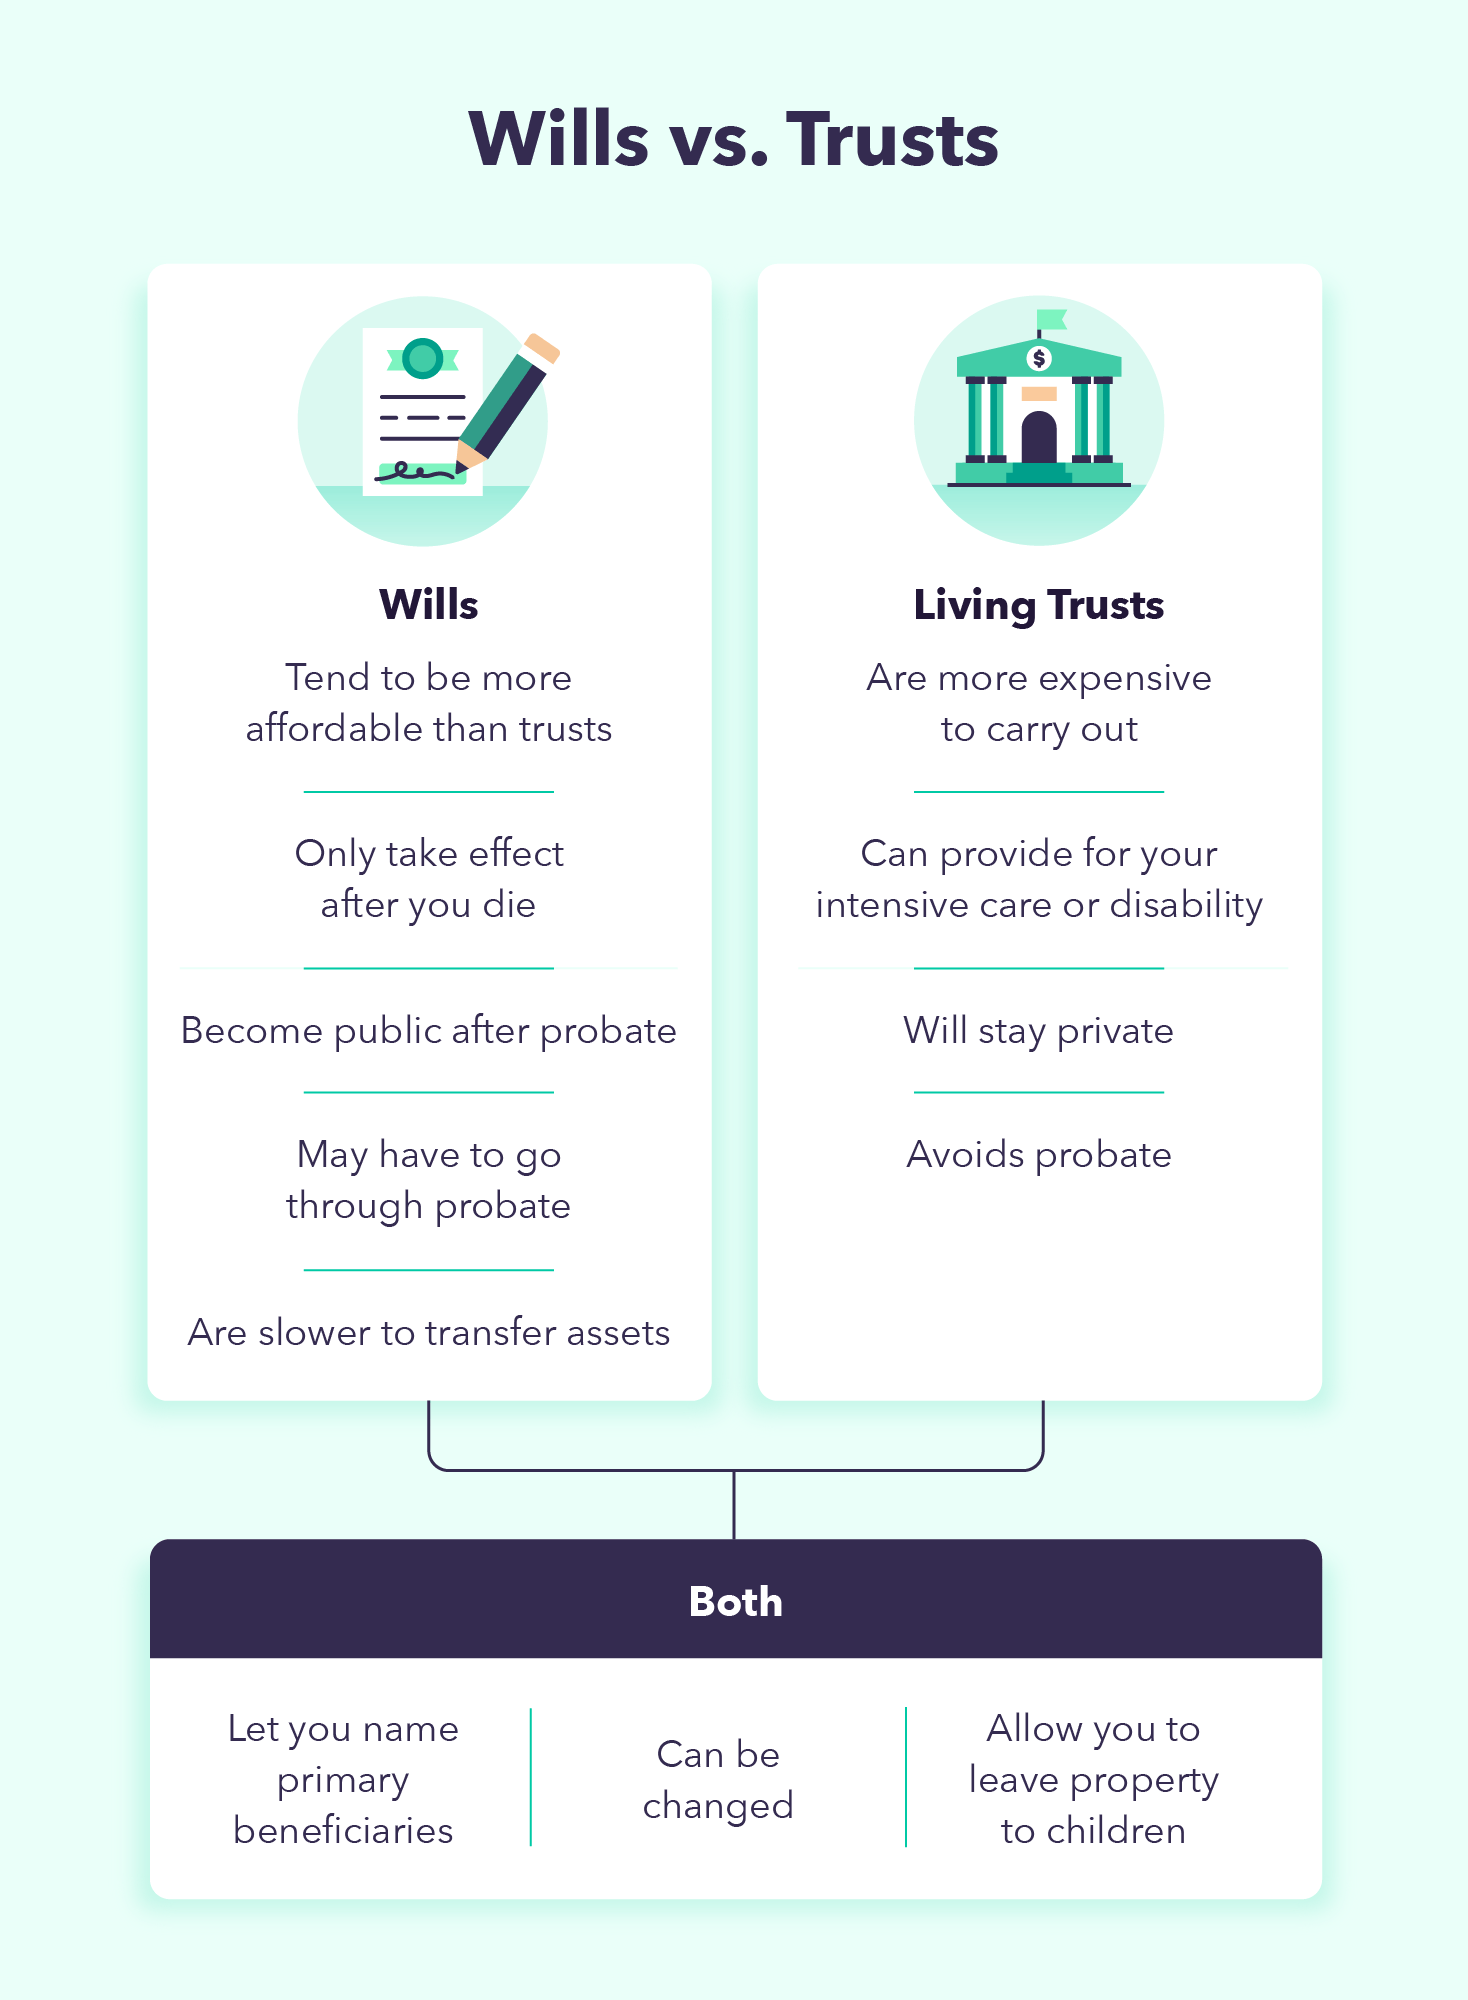 A comparison showing the similarities and differences between wills and trusts 